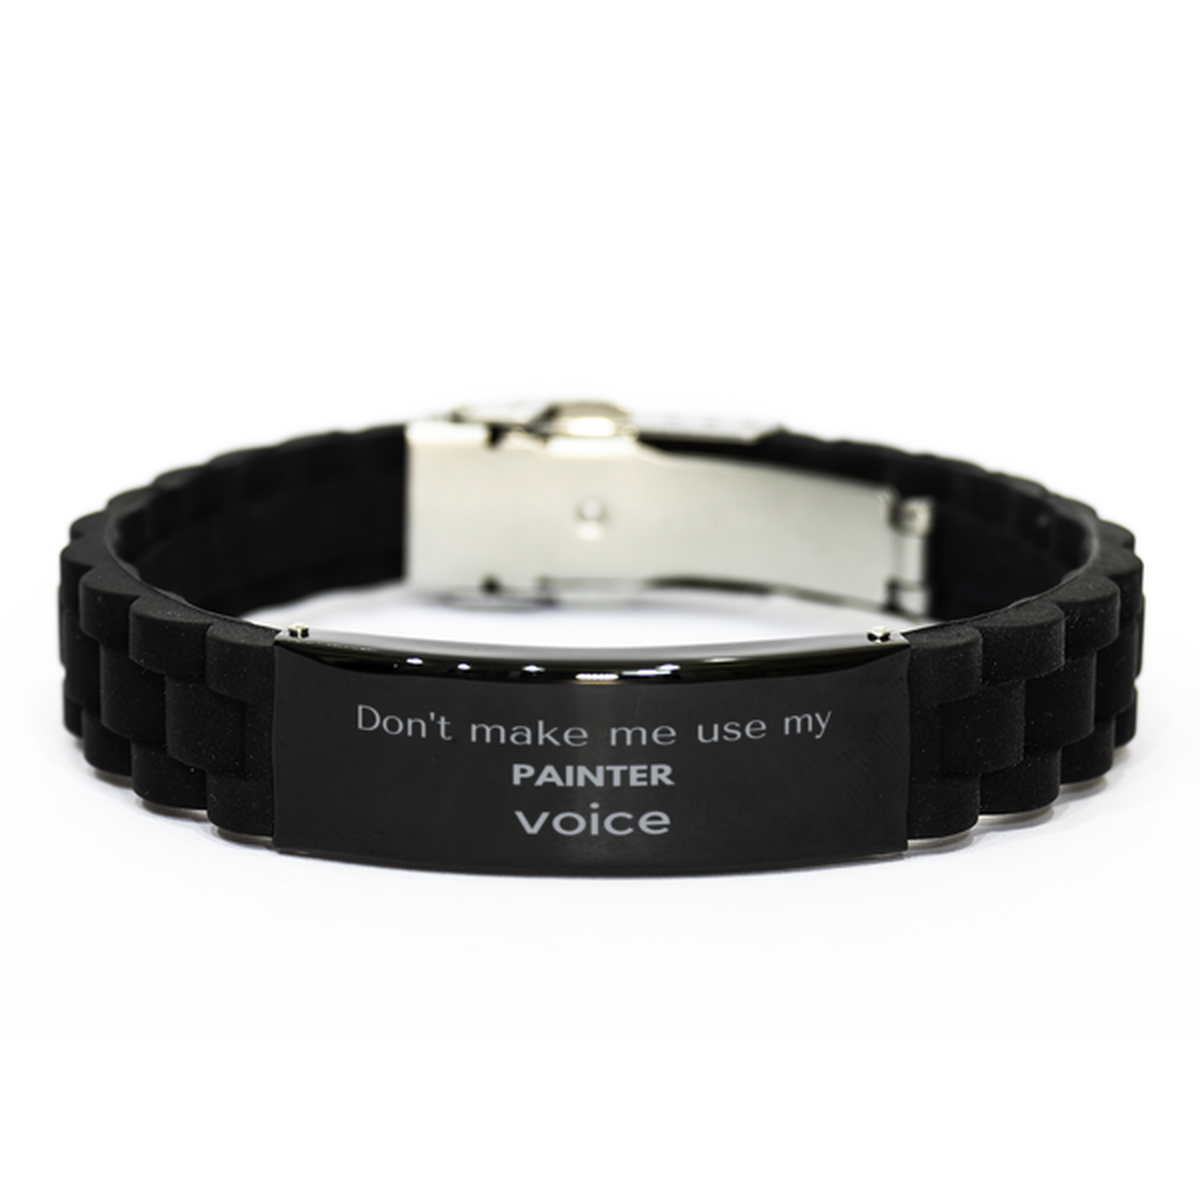 Don't make me use my Painter voice, Sarcasm Painter Gifts, Christmas Painter Black Glidelock Clasp Bracelet Birthday Unique Gifts For Painter Coworkers, Men, Women, Colleague, Friends